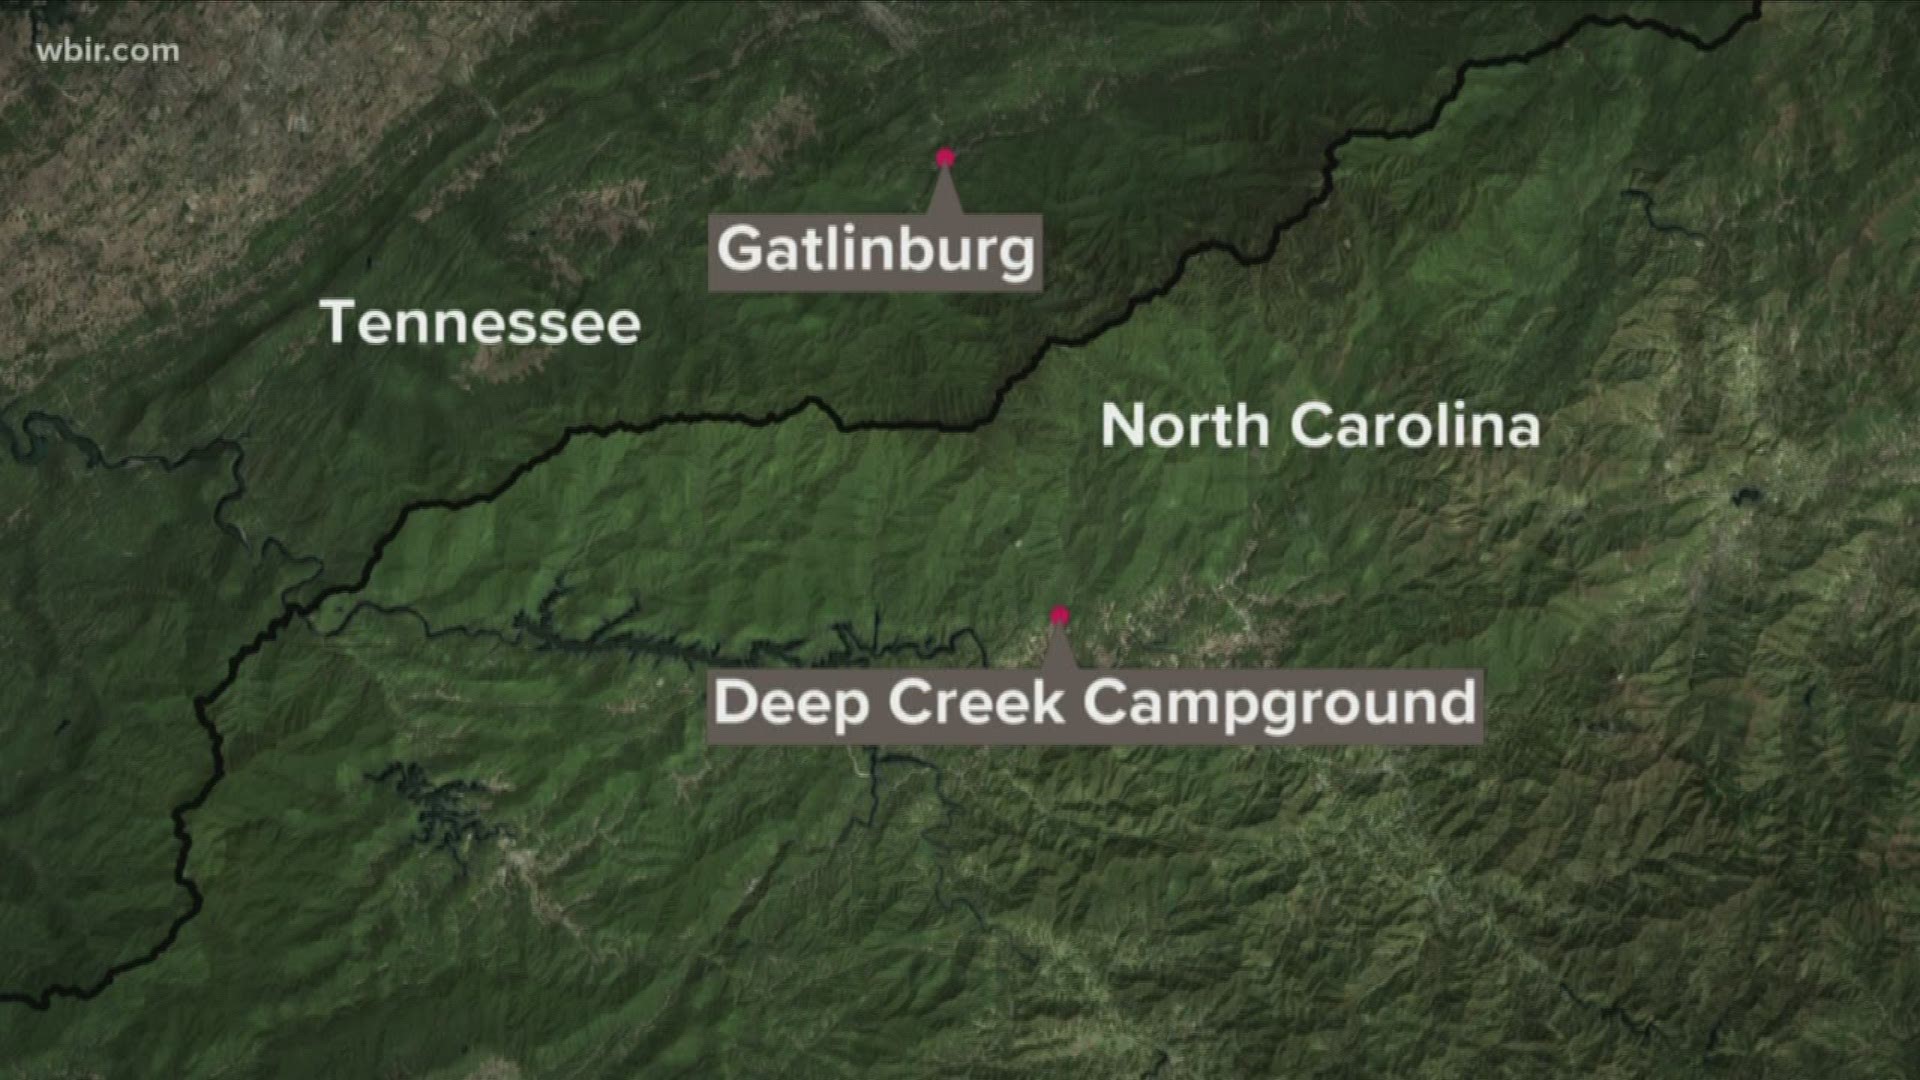 A man is dead after having a heart attack while hiking in the Great Smoky Mountains National Park.